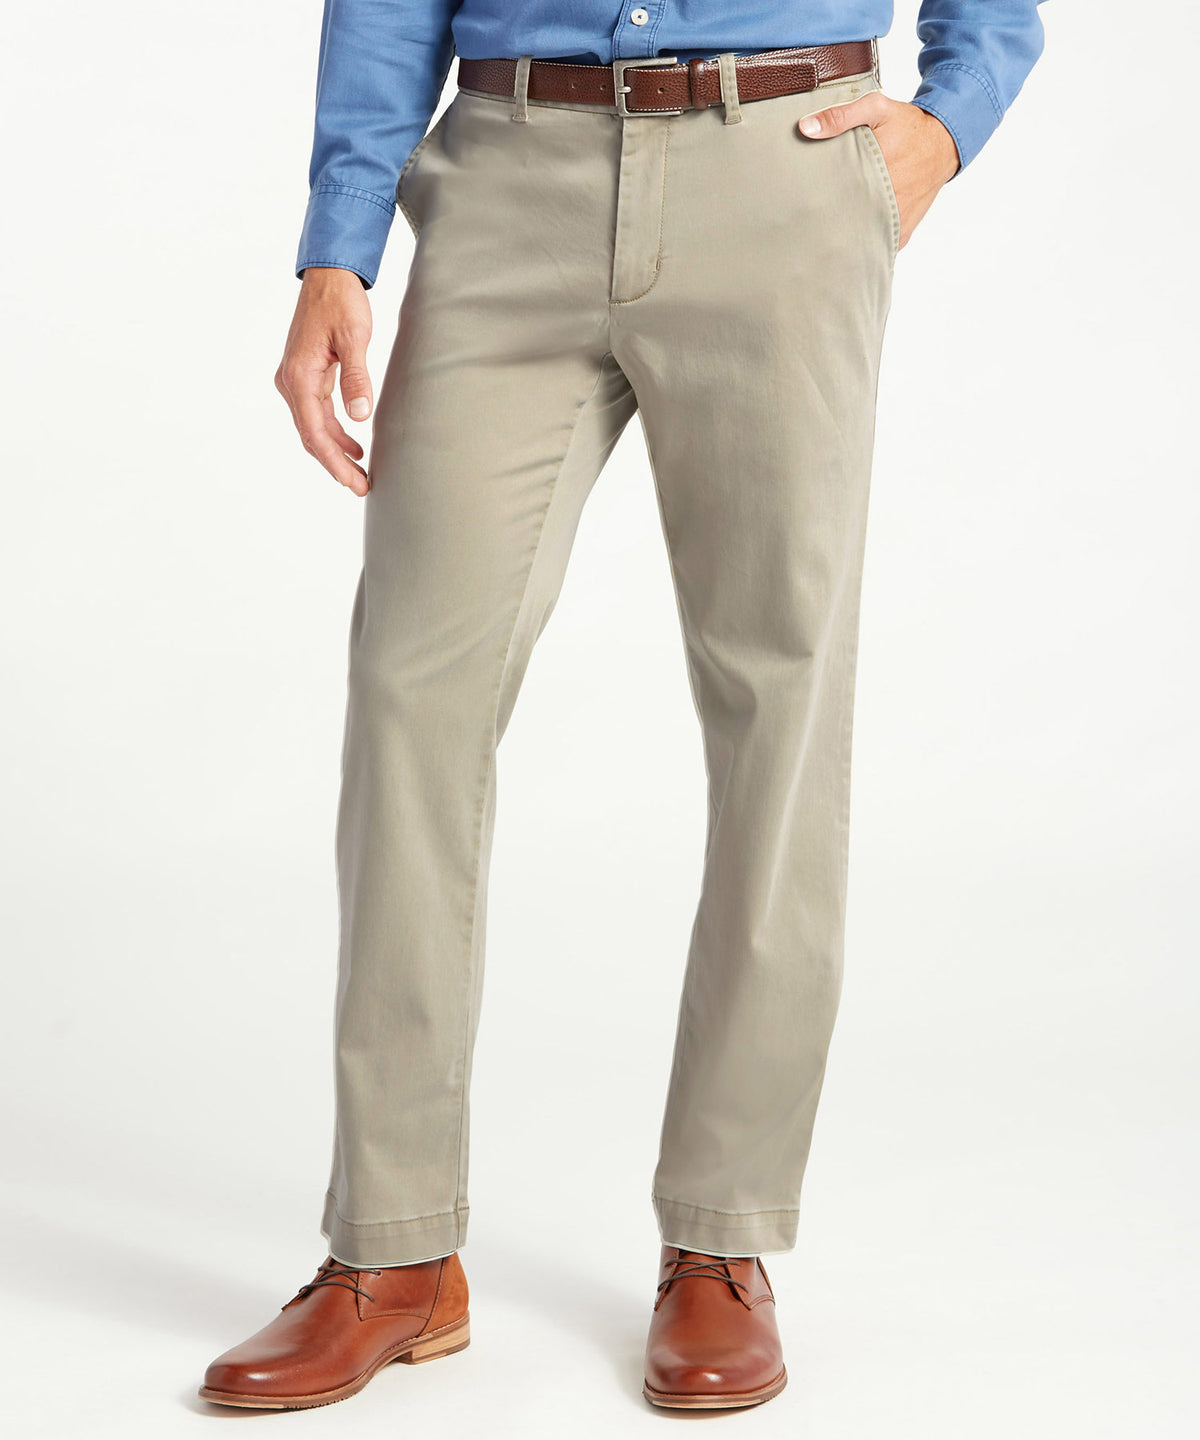 Tommy Bahama Stretch Flat-Front Sateen Chino Pants, Men's Big & Tall